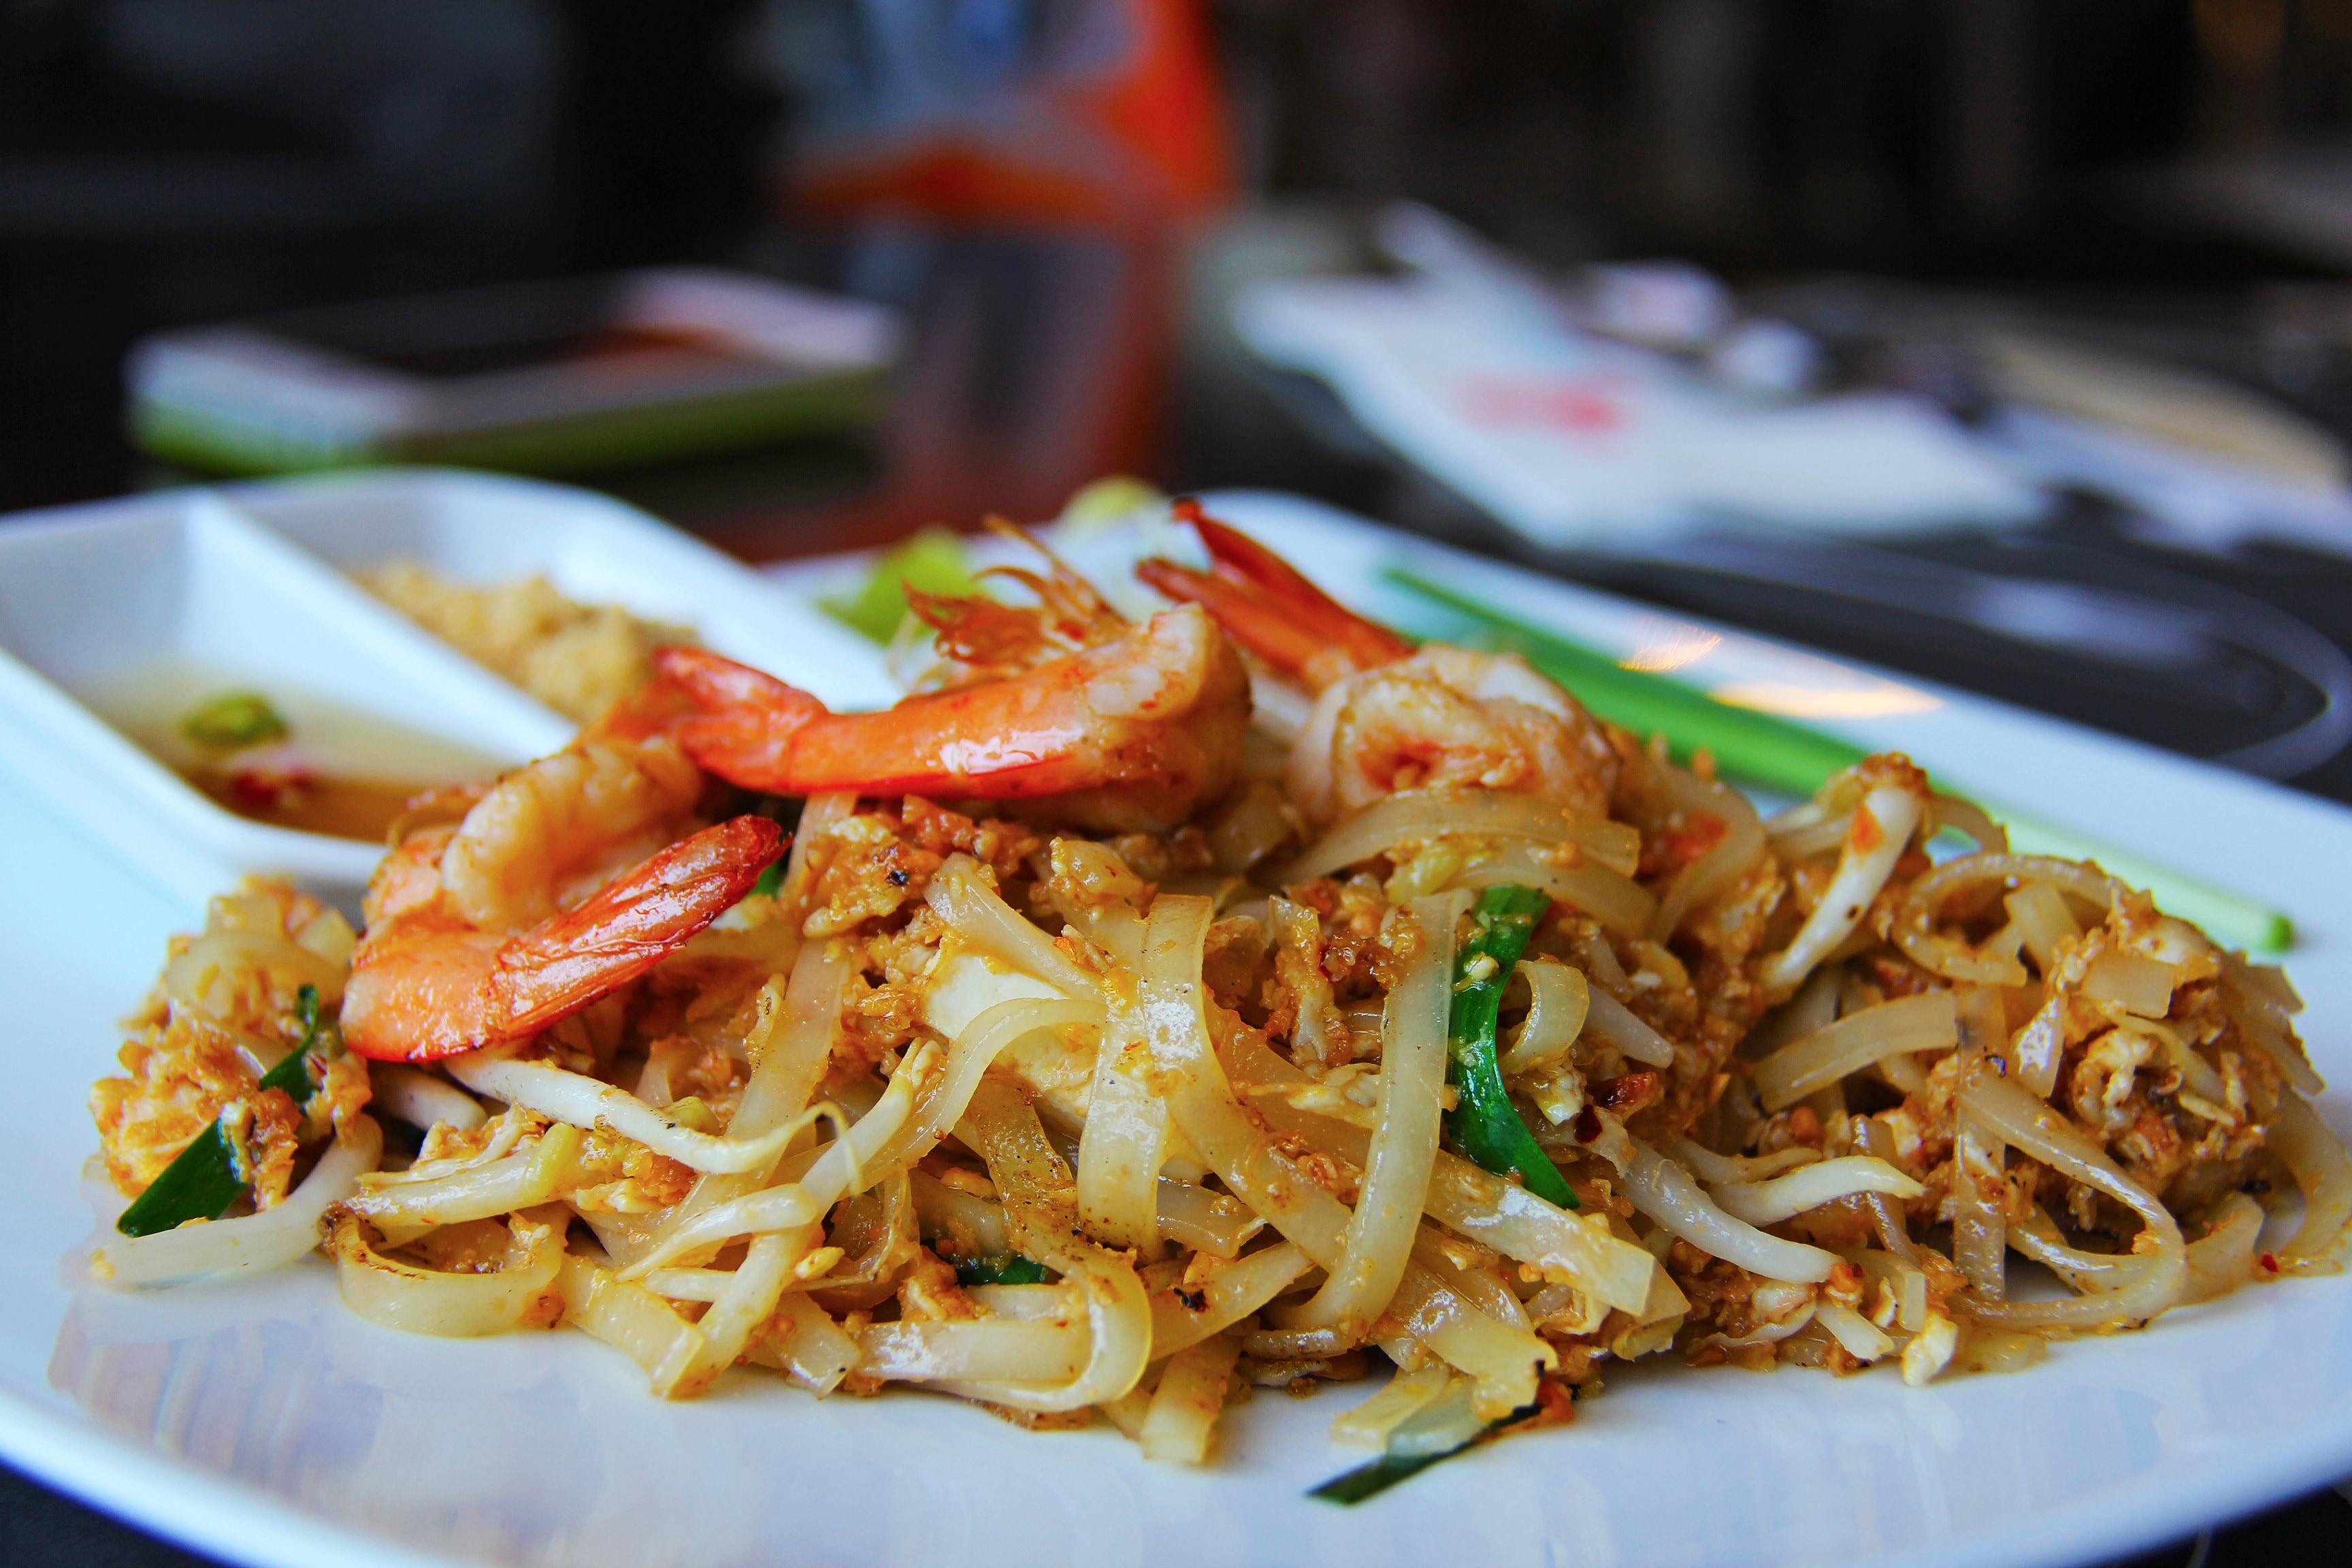 Pad Thai, Hungry, Yummy, Noodles, plate, food and drink